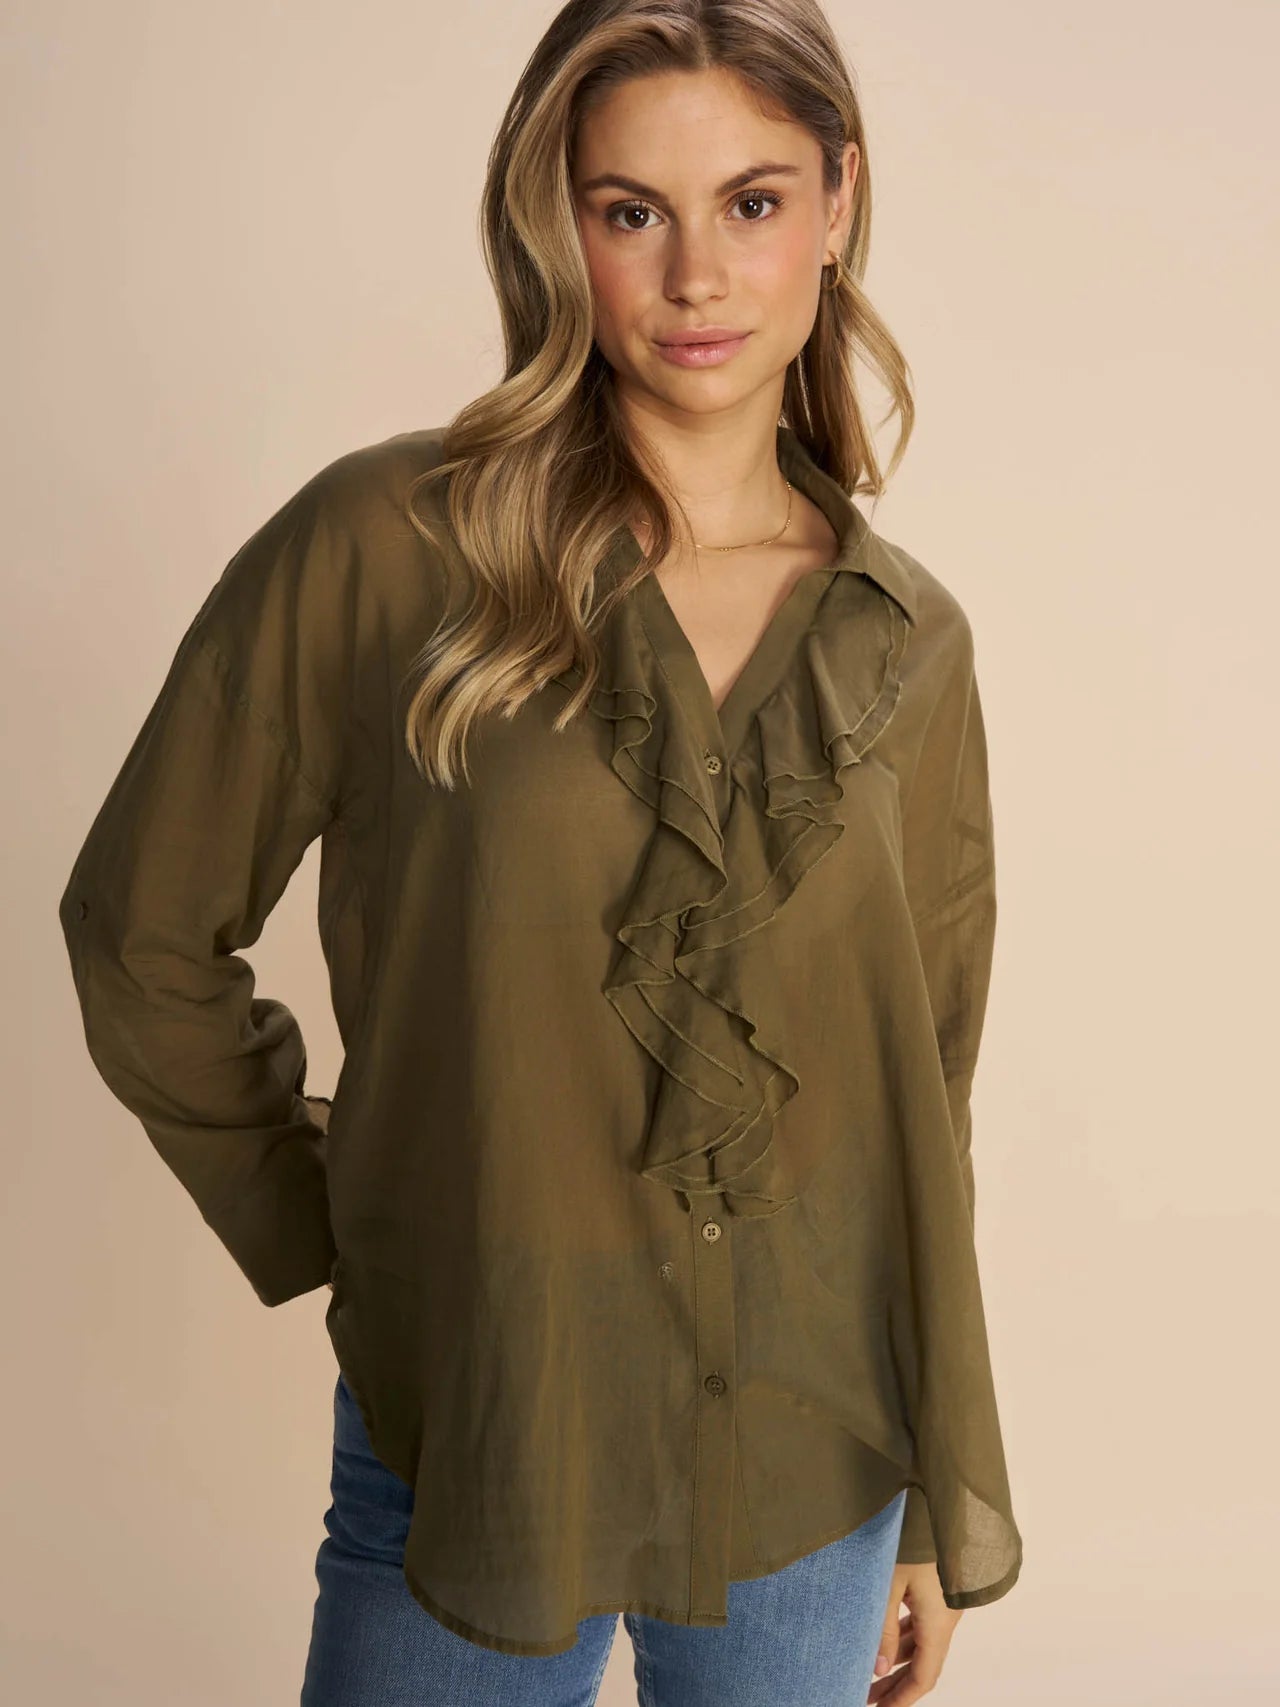 Jelena Voile Shirt by Mos Mosh